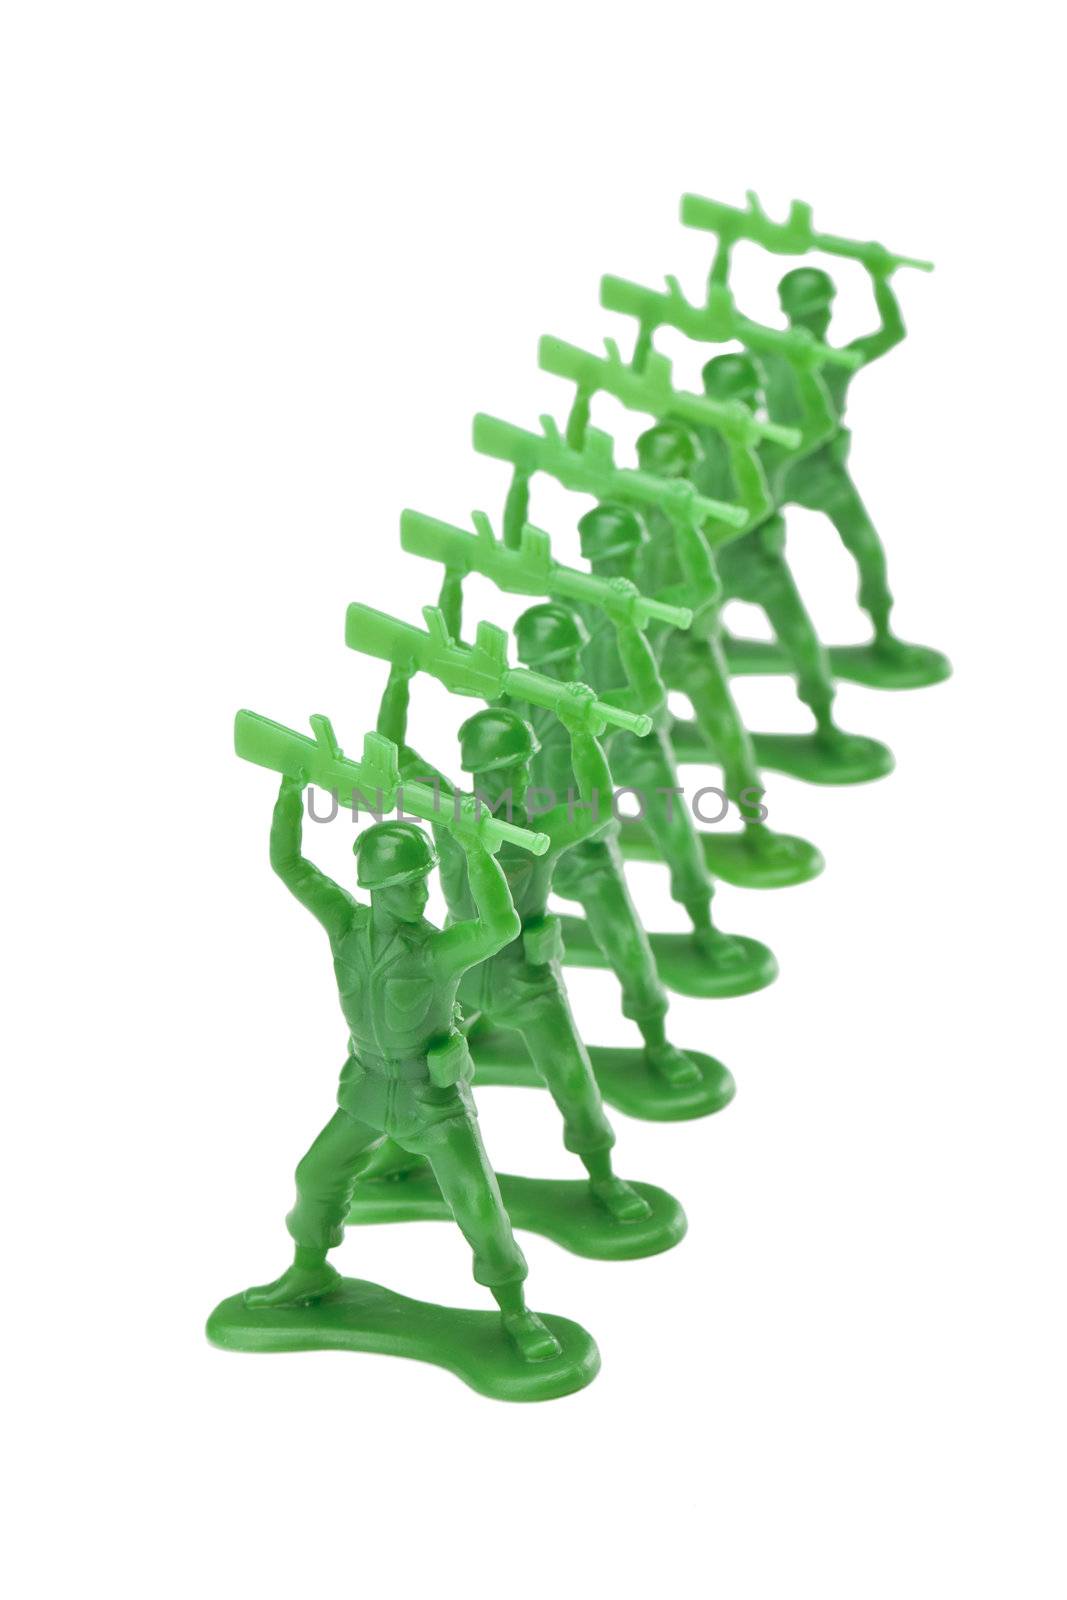 pieces of green toy soldiers isolated on white background